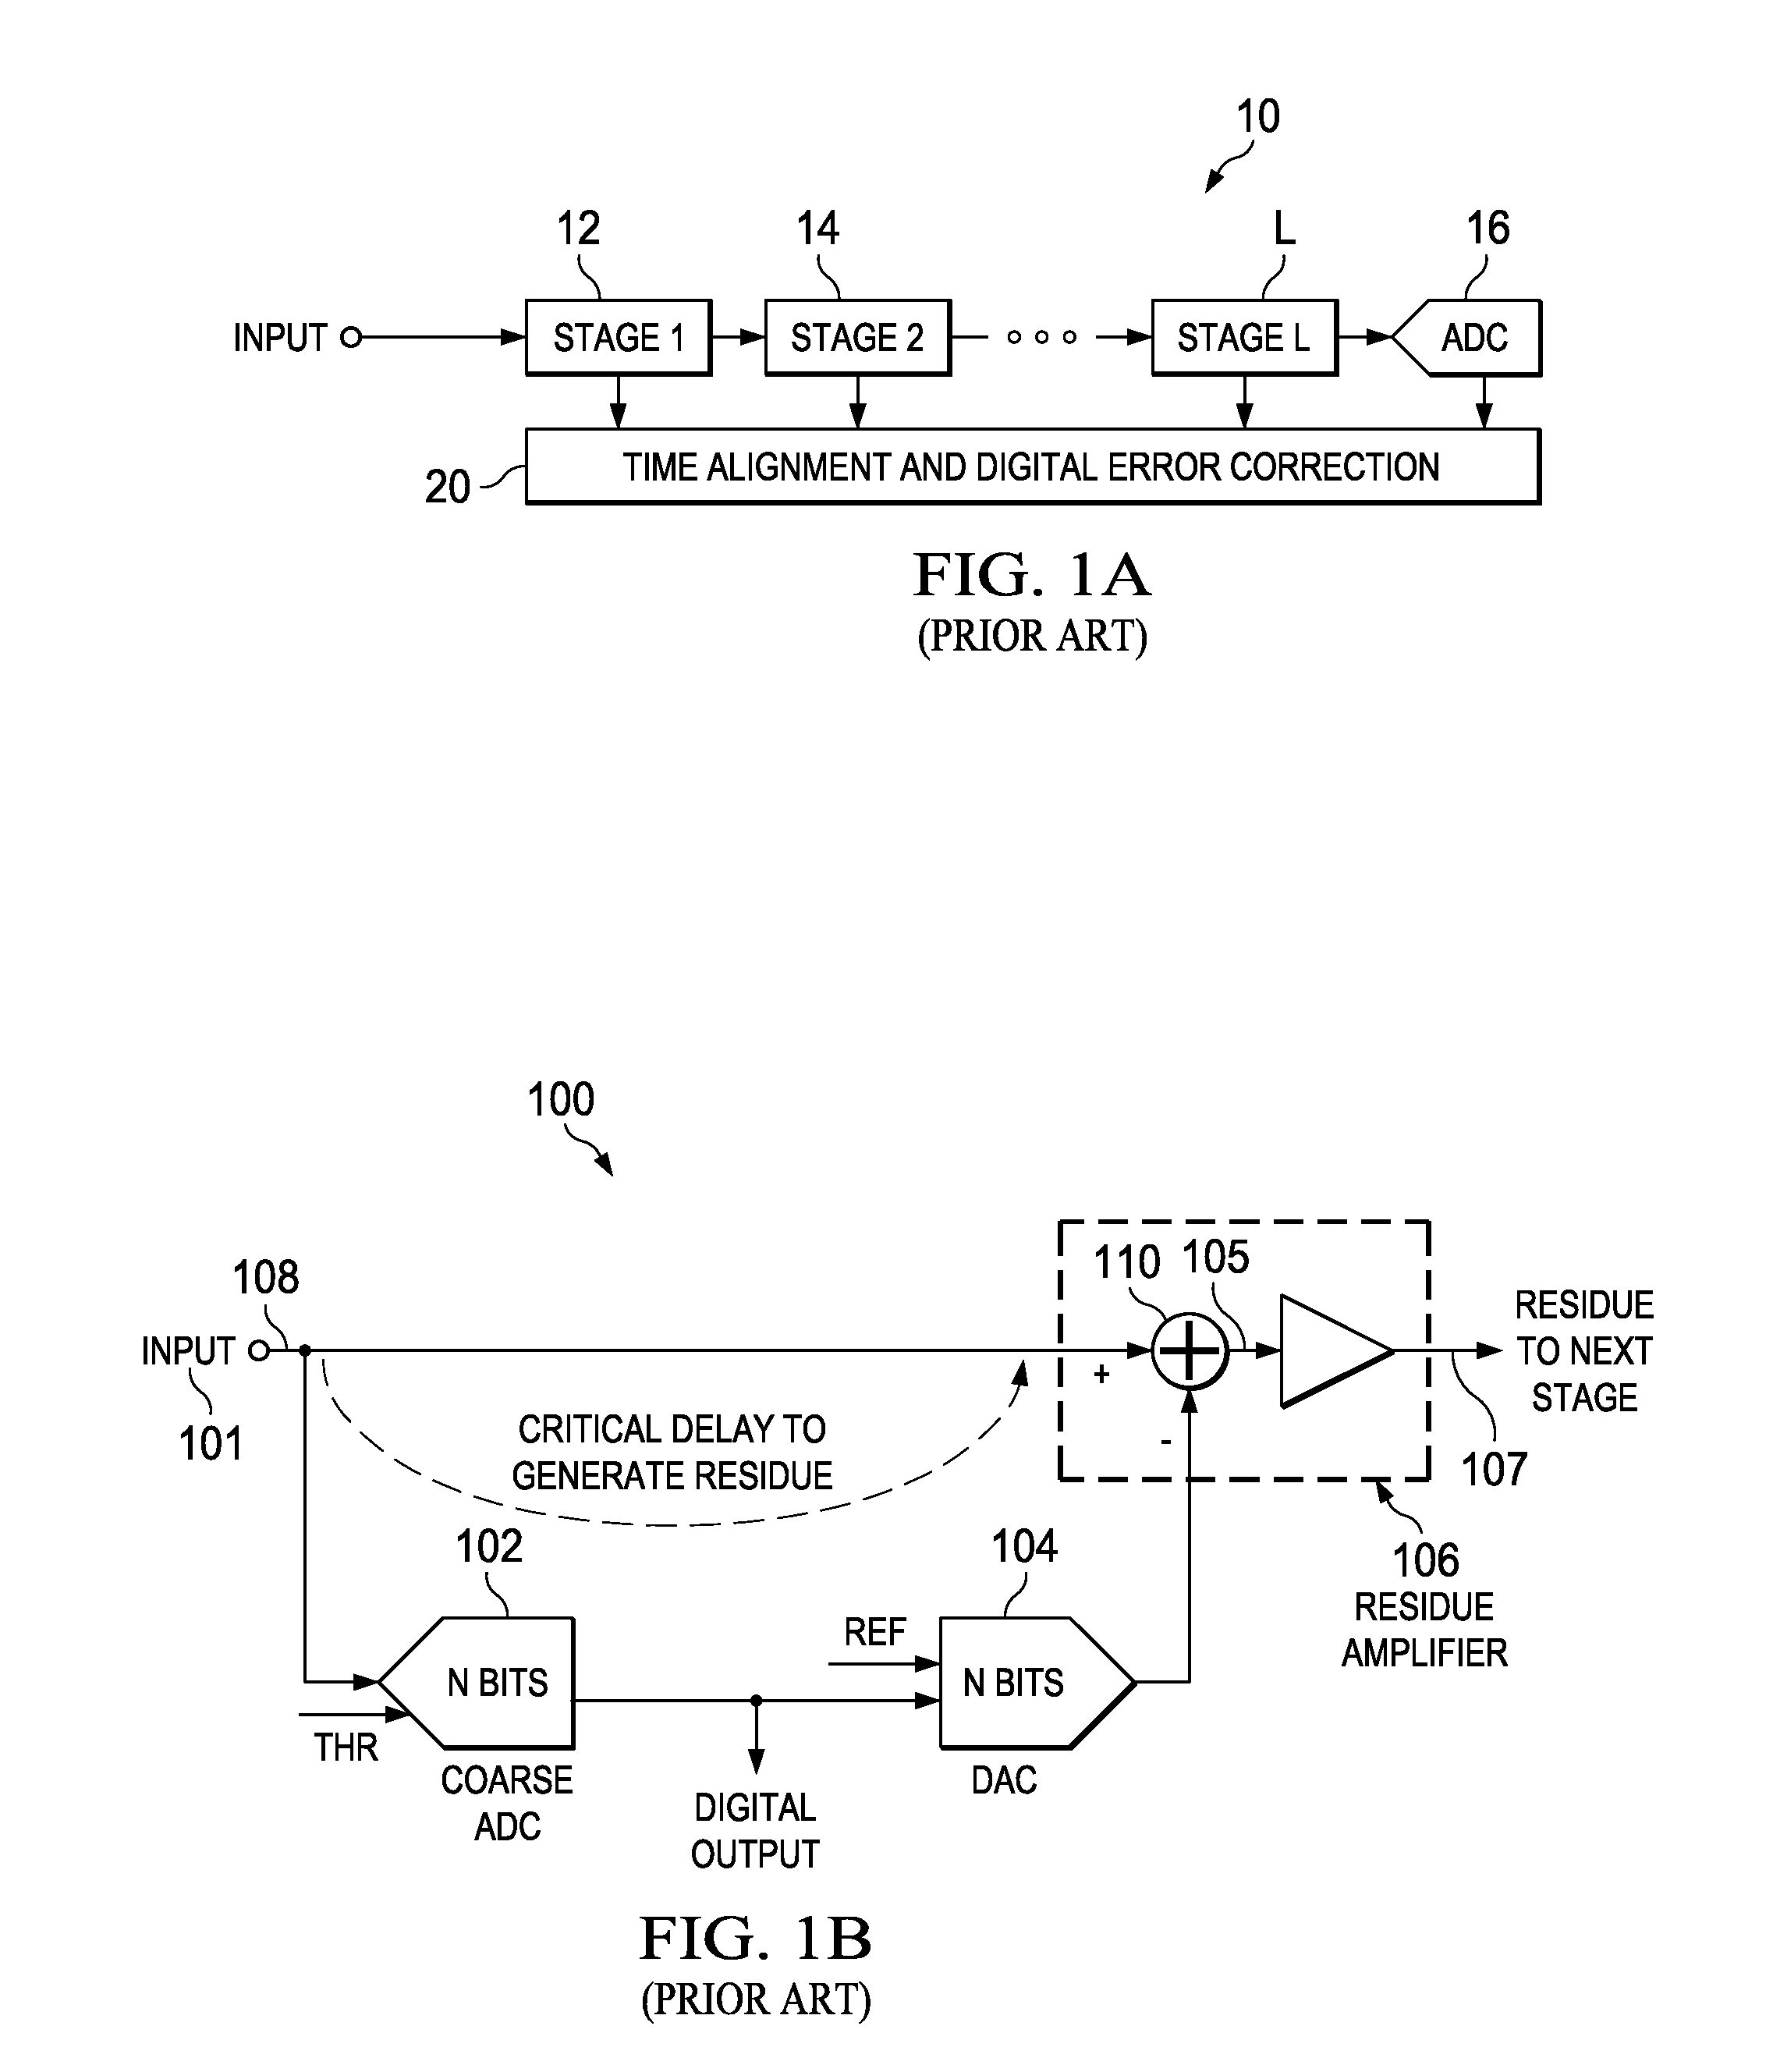 Modified dynamic element matching for reduced latency in a pipeline analog to digital converter